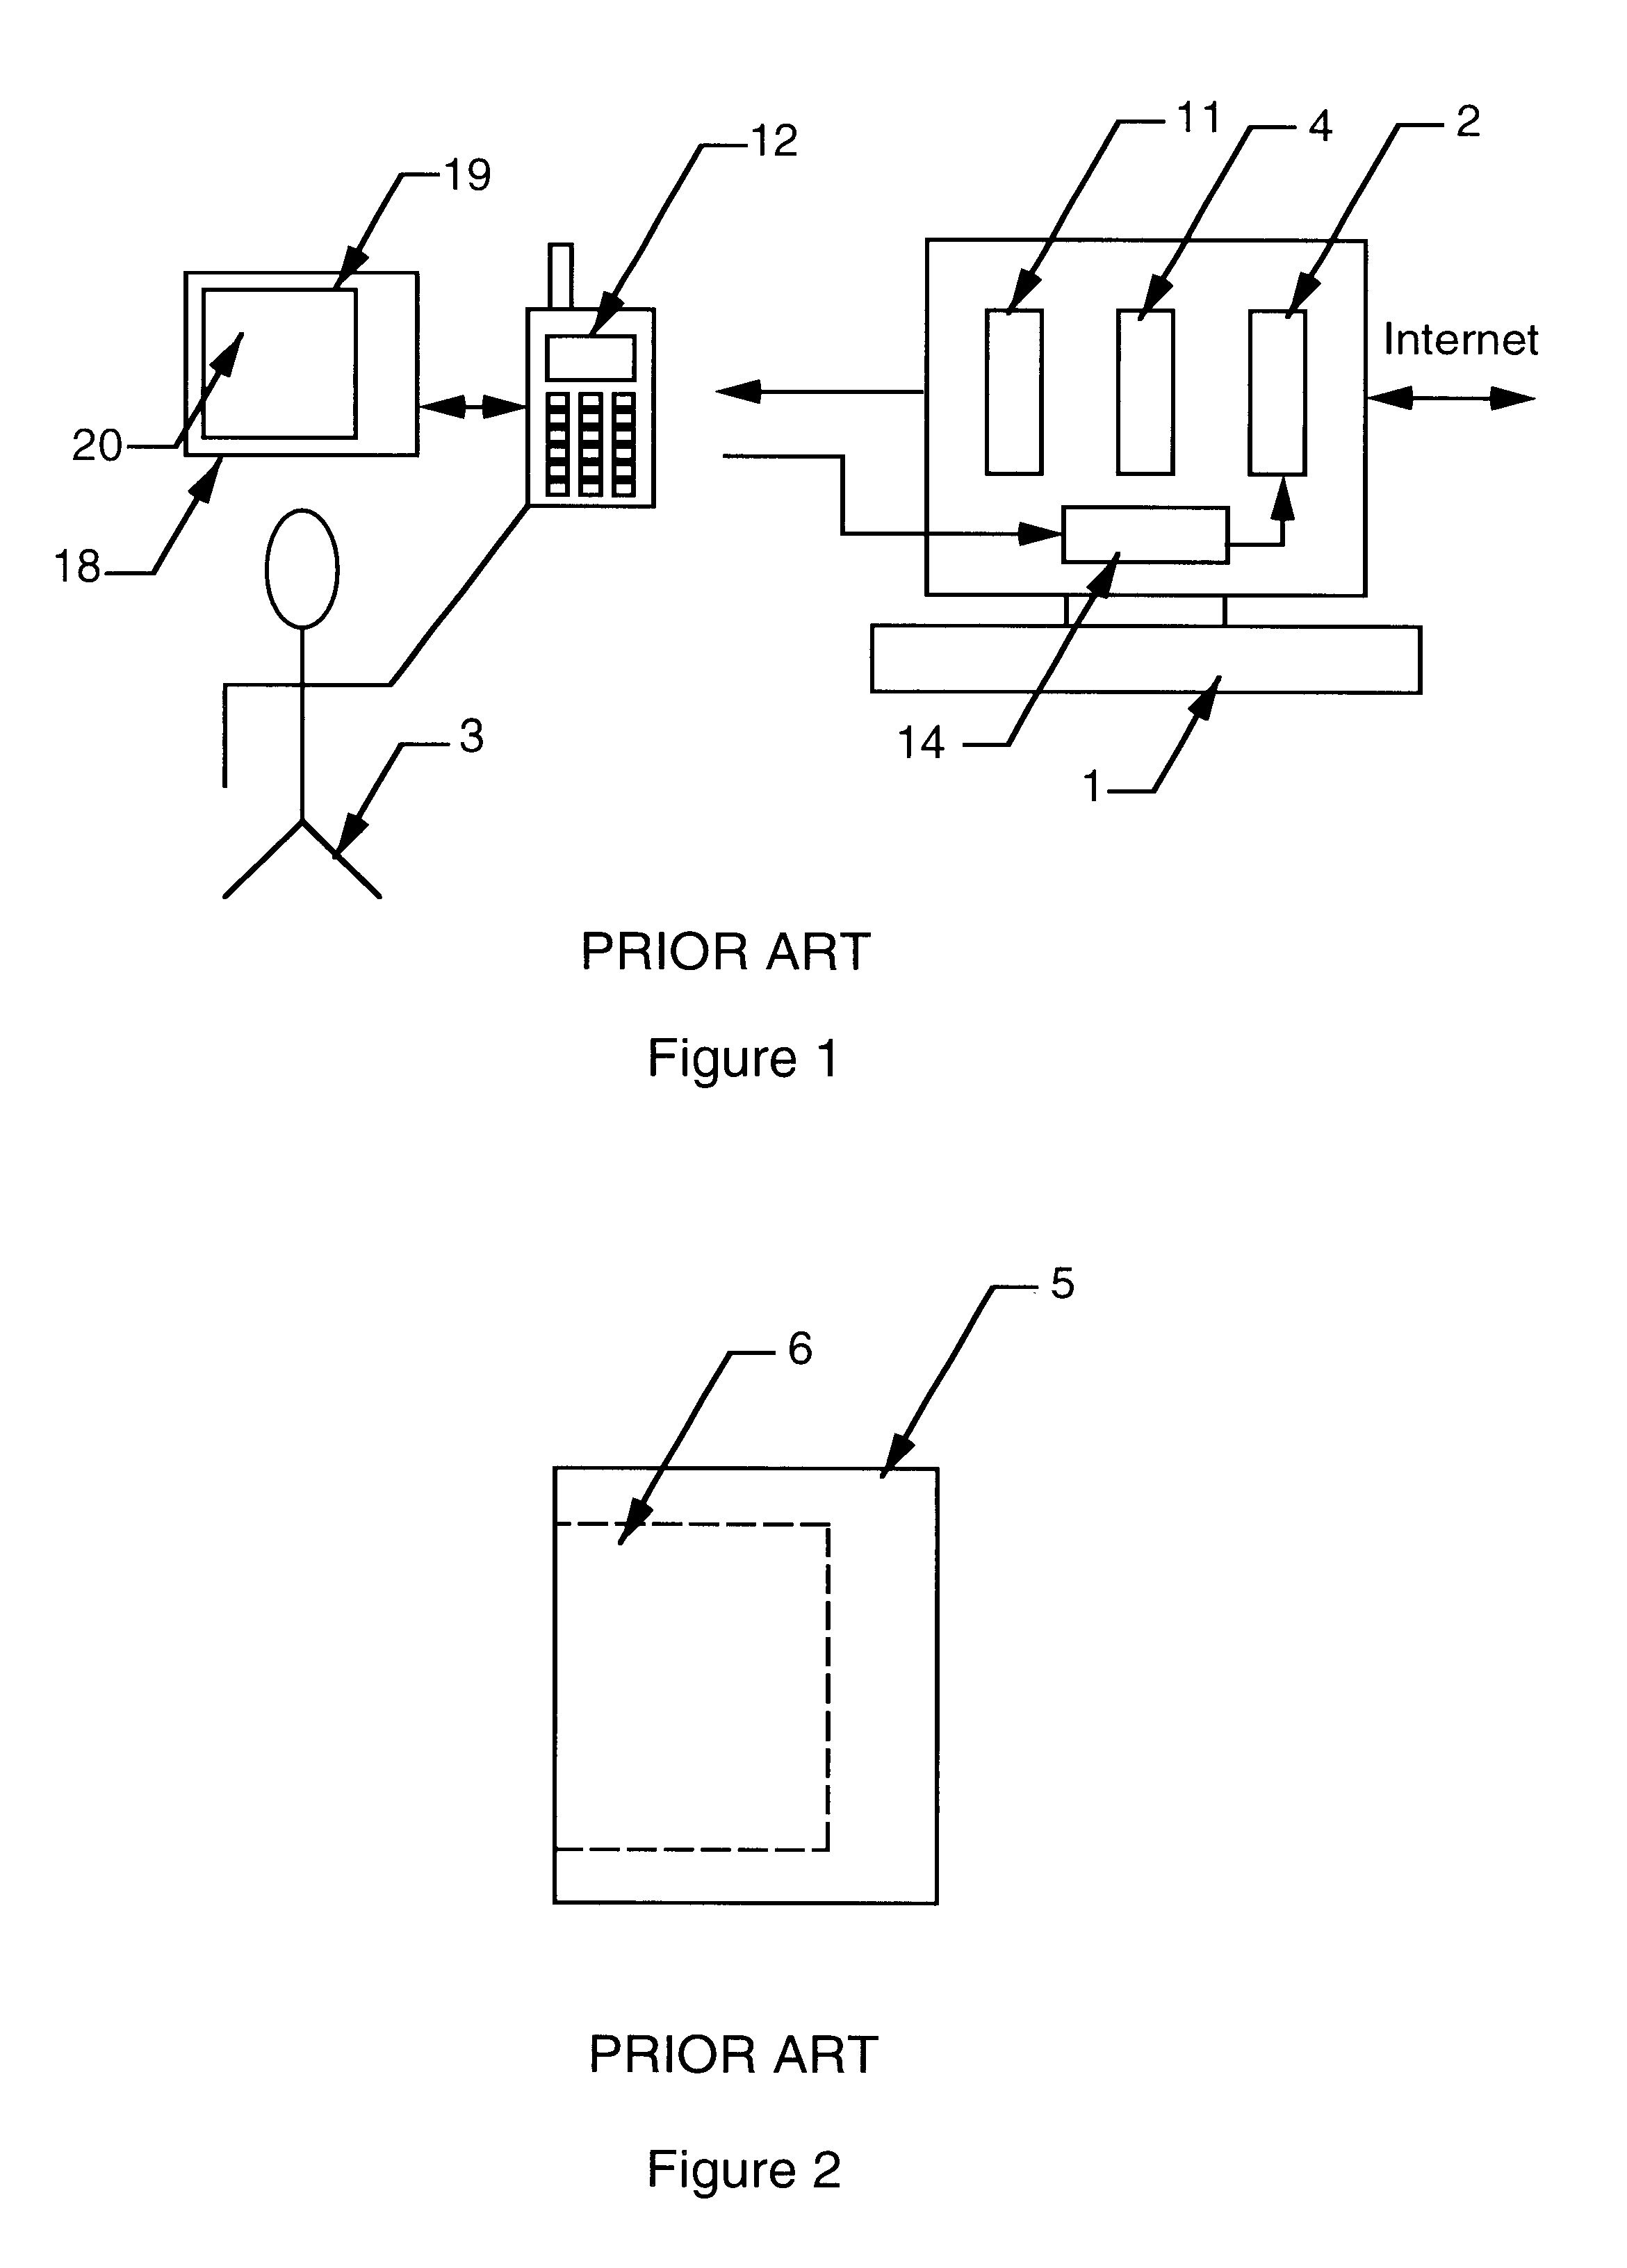 Portable high speed internet access device with encryption